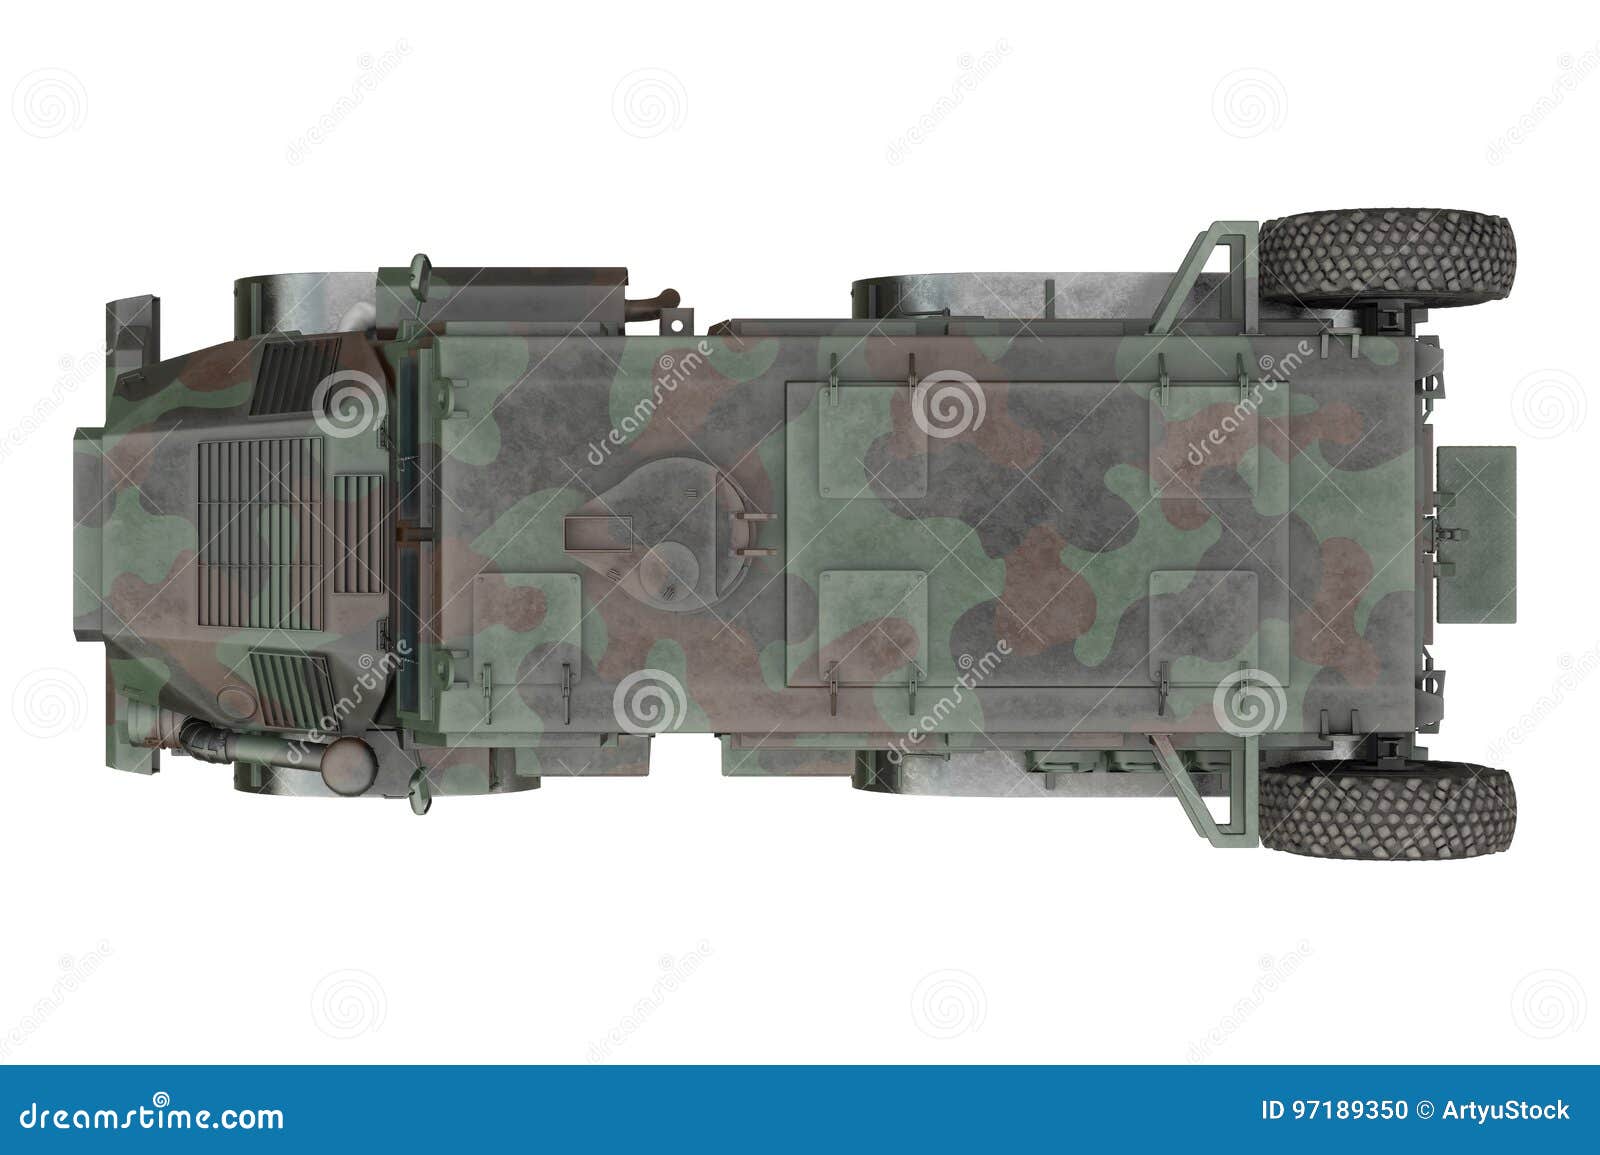 truck military transportation, top view